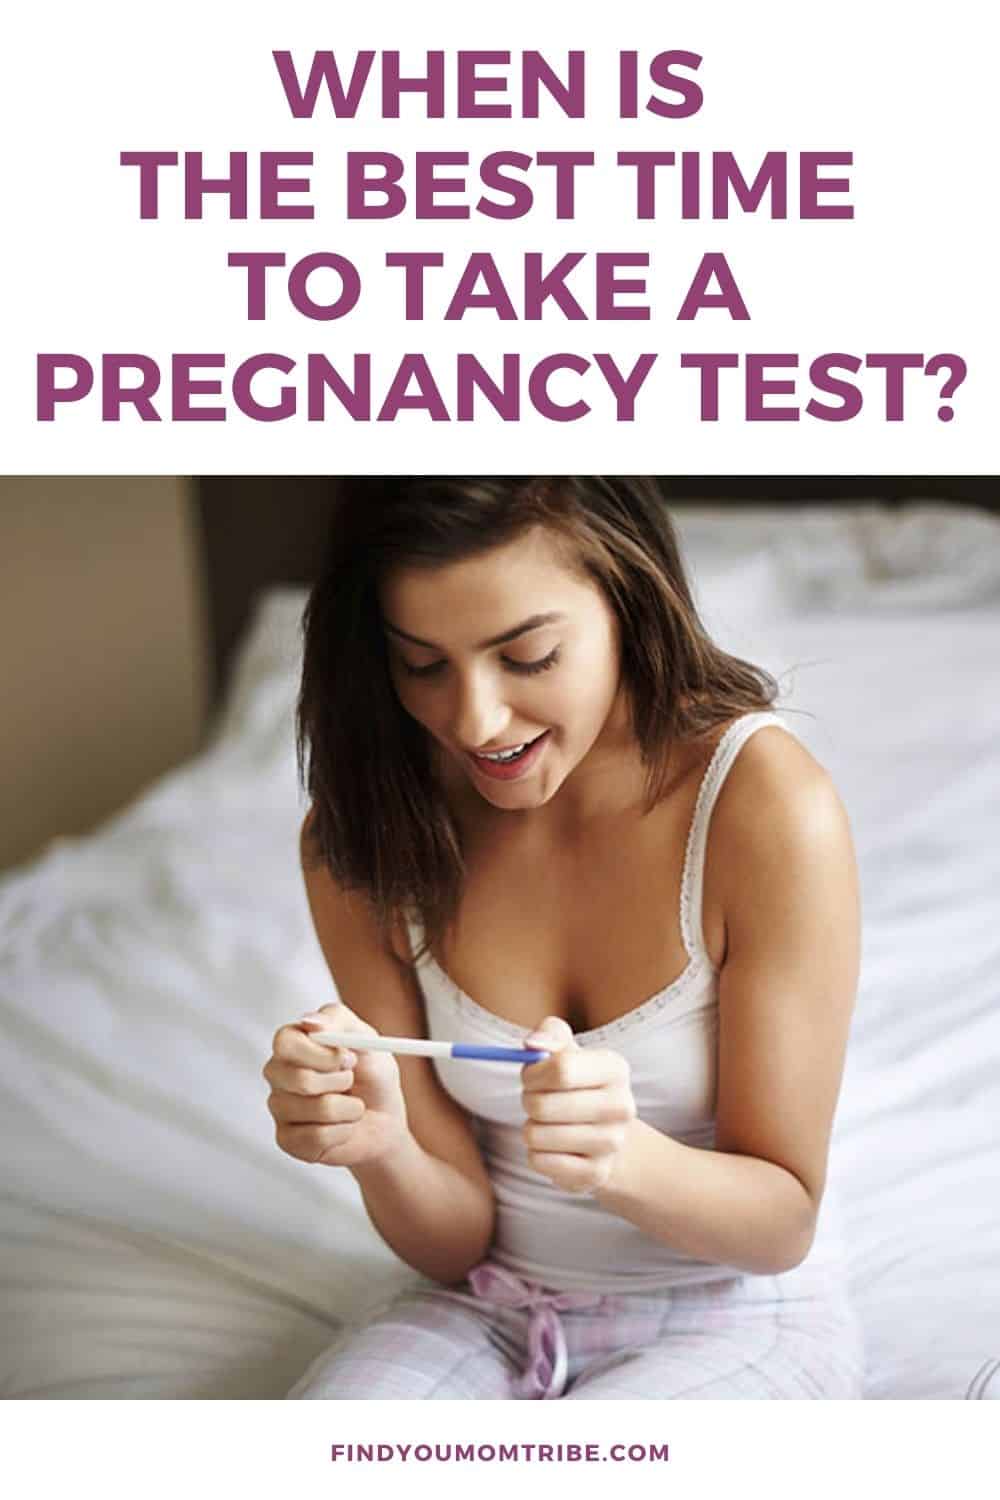 When Is The Best Time To Take A Pregnancy Test? 